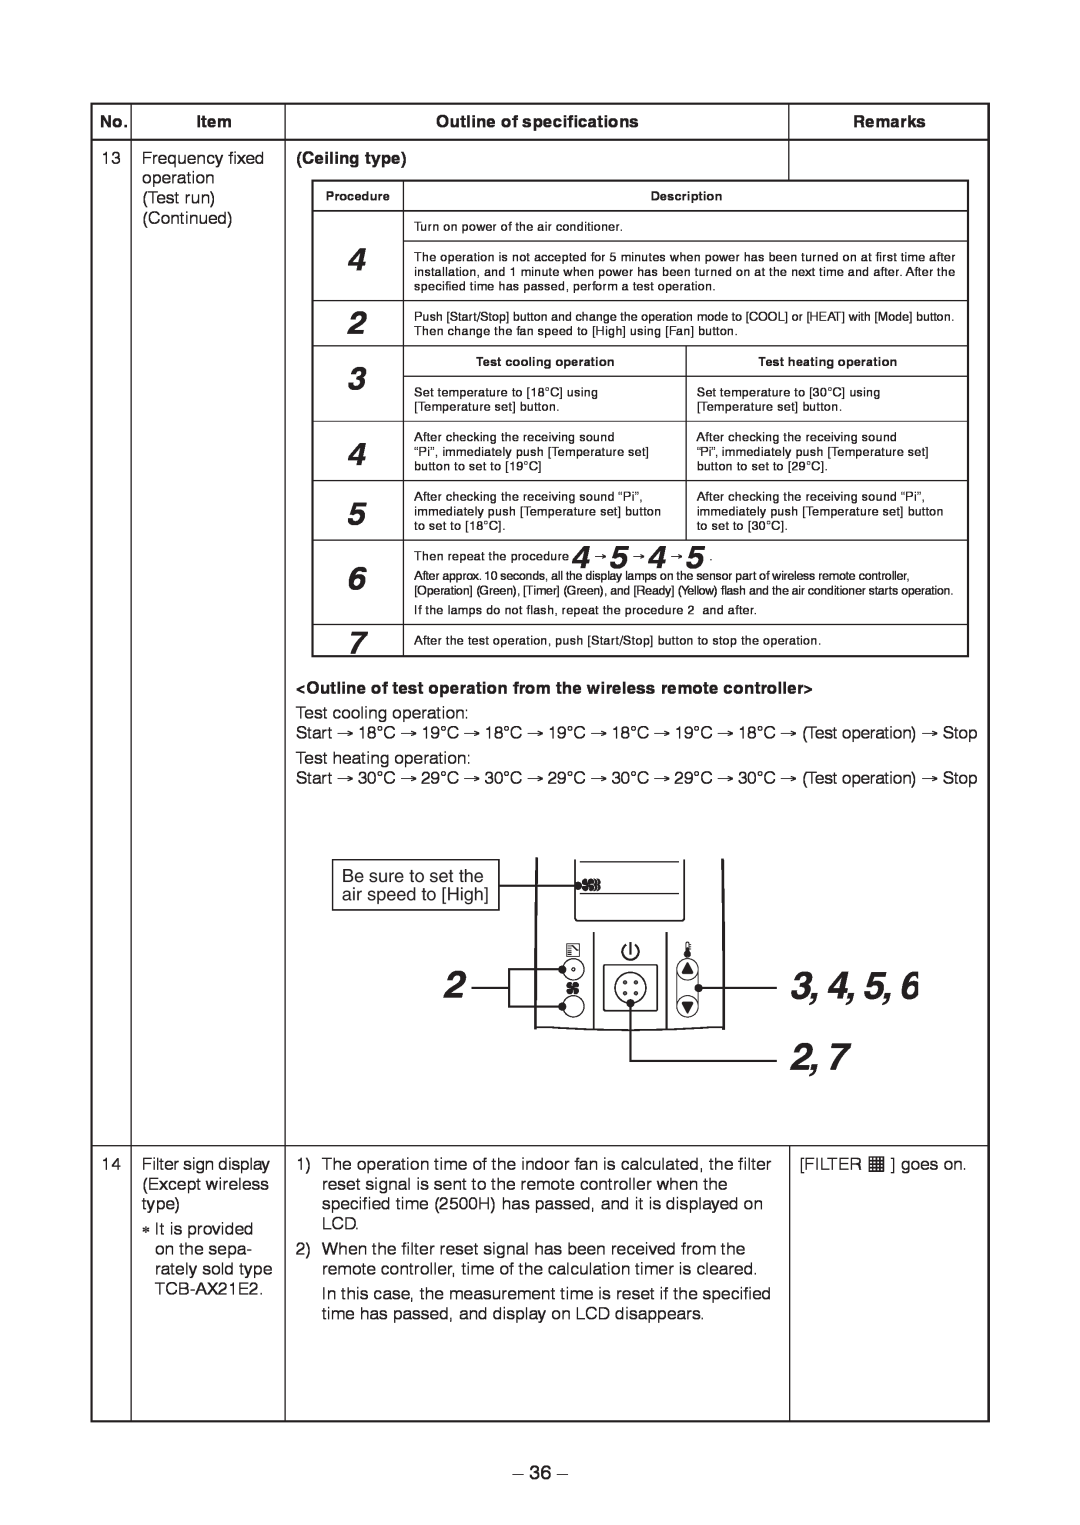 Toshiba CEILING TYPE, CONCEALED DUCK TYPE service manual 4, 5, 36, Item, Outline of specifications, Remarks, Ceiling type 